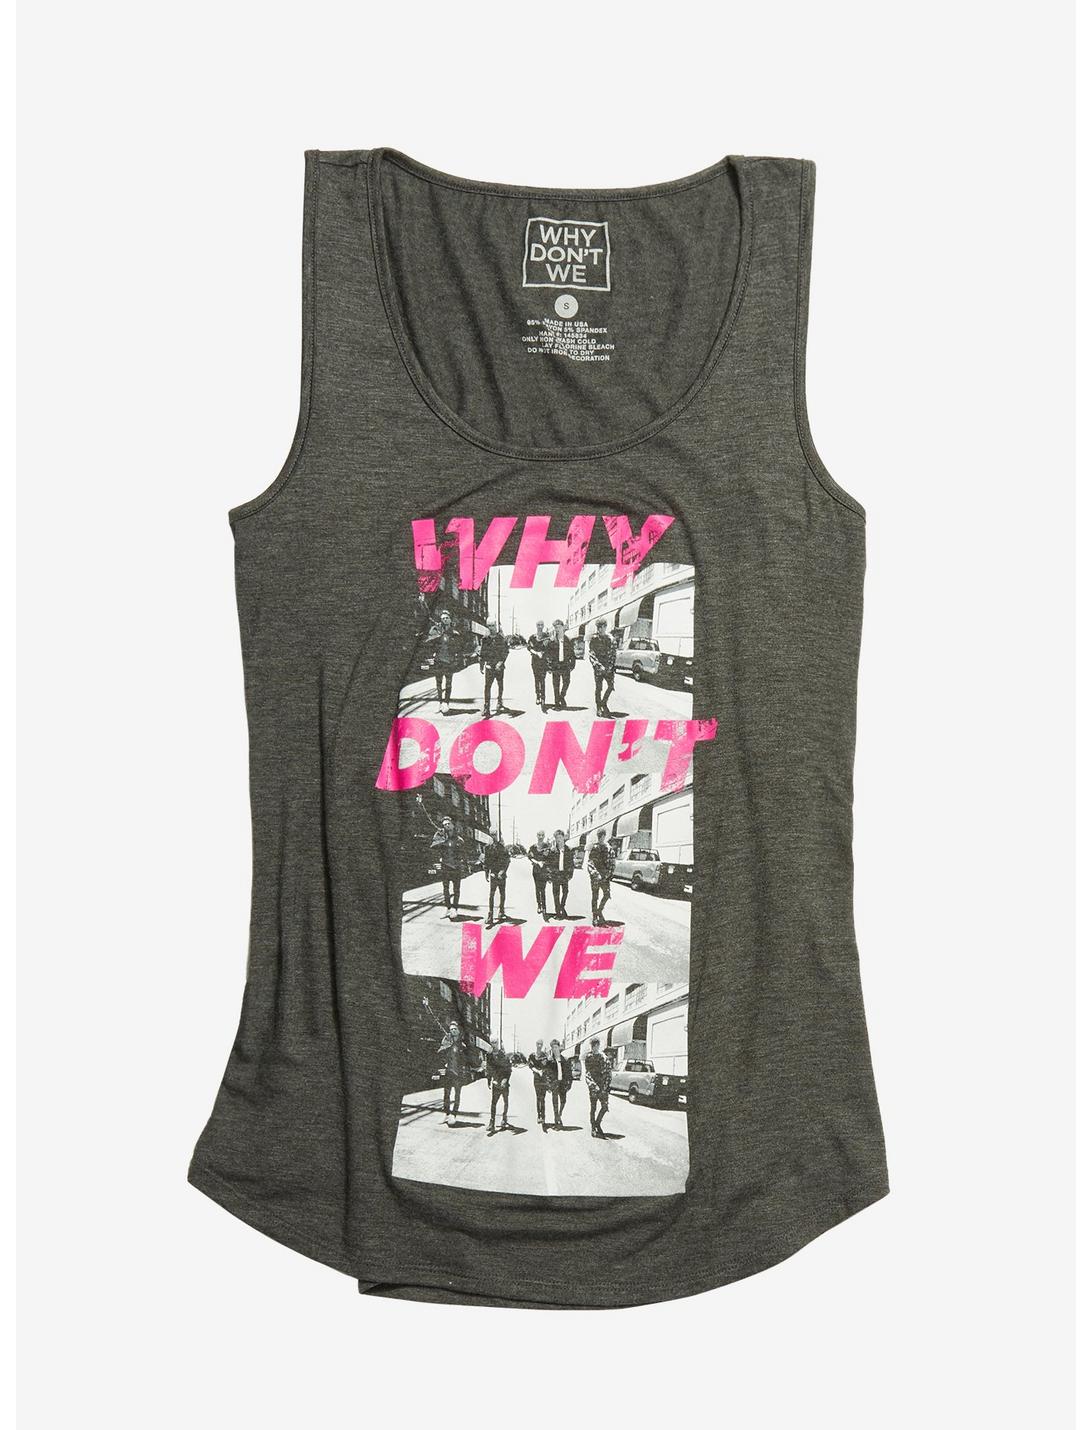 Why Don't We Photo Collage Girls Tank Top, BLACK, hi-res